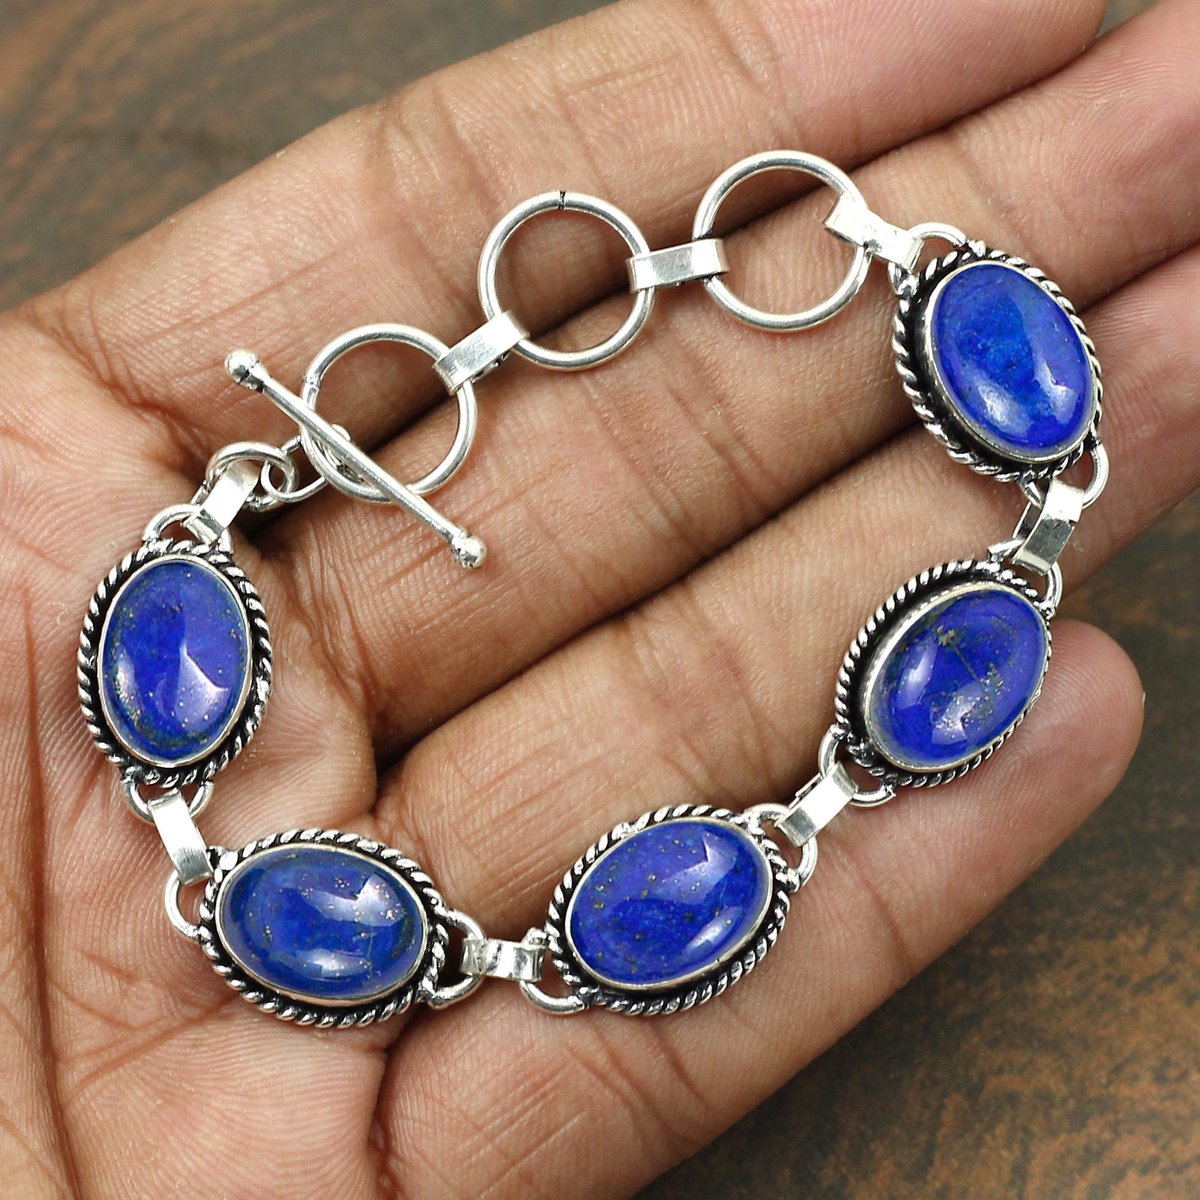 Excited to share the latest addition to my #etsy shop: Lapis Lazuli Silver Bracelet, Sterling Silver Bracelet, Handmade Bracelet, Blue Lapis Bracelet, Oval Stone Bracelet, Birthstone Gift For Her etsy.me/2Rl2MVd #blue #lapislazuli #silver #handmade #bracelet